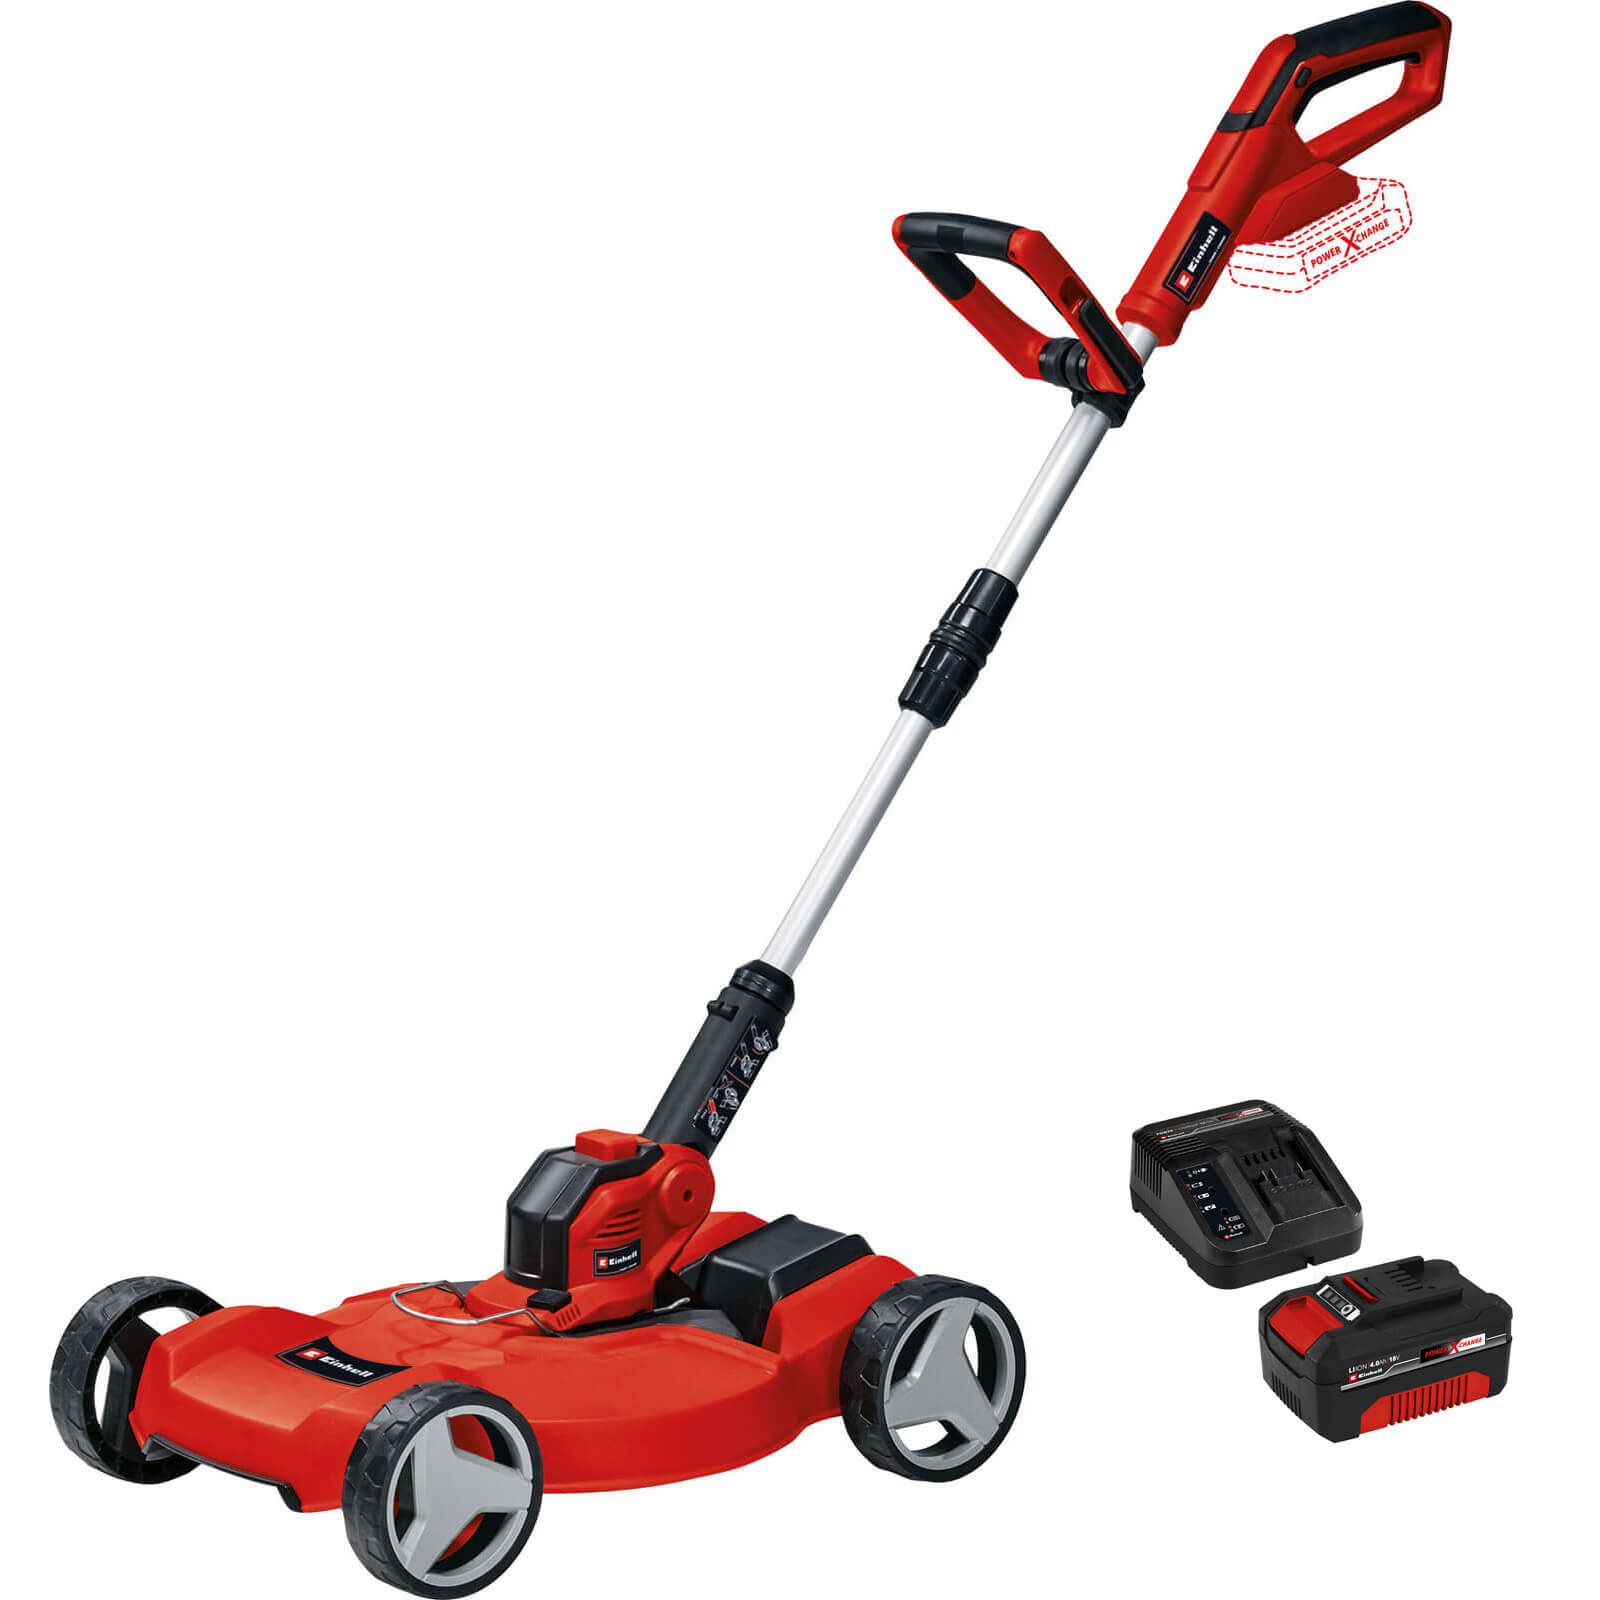 Image of Einhell GE-CT 18/28 Li TC 18v Cordless Grass Trimmer and Edger 280mm 1 x 4ah Li-ion Charger